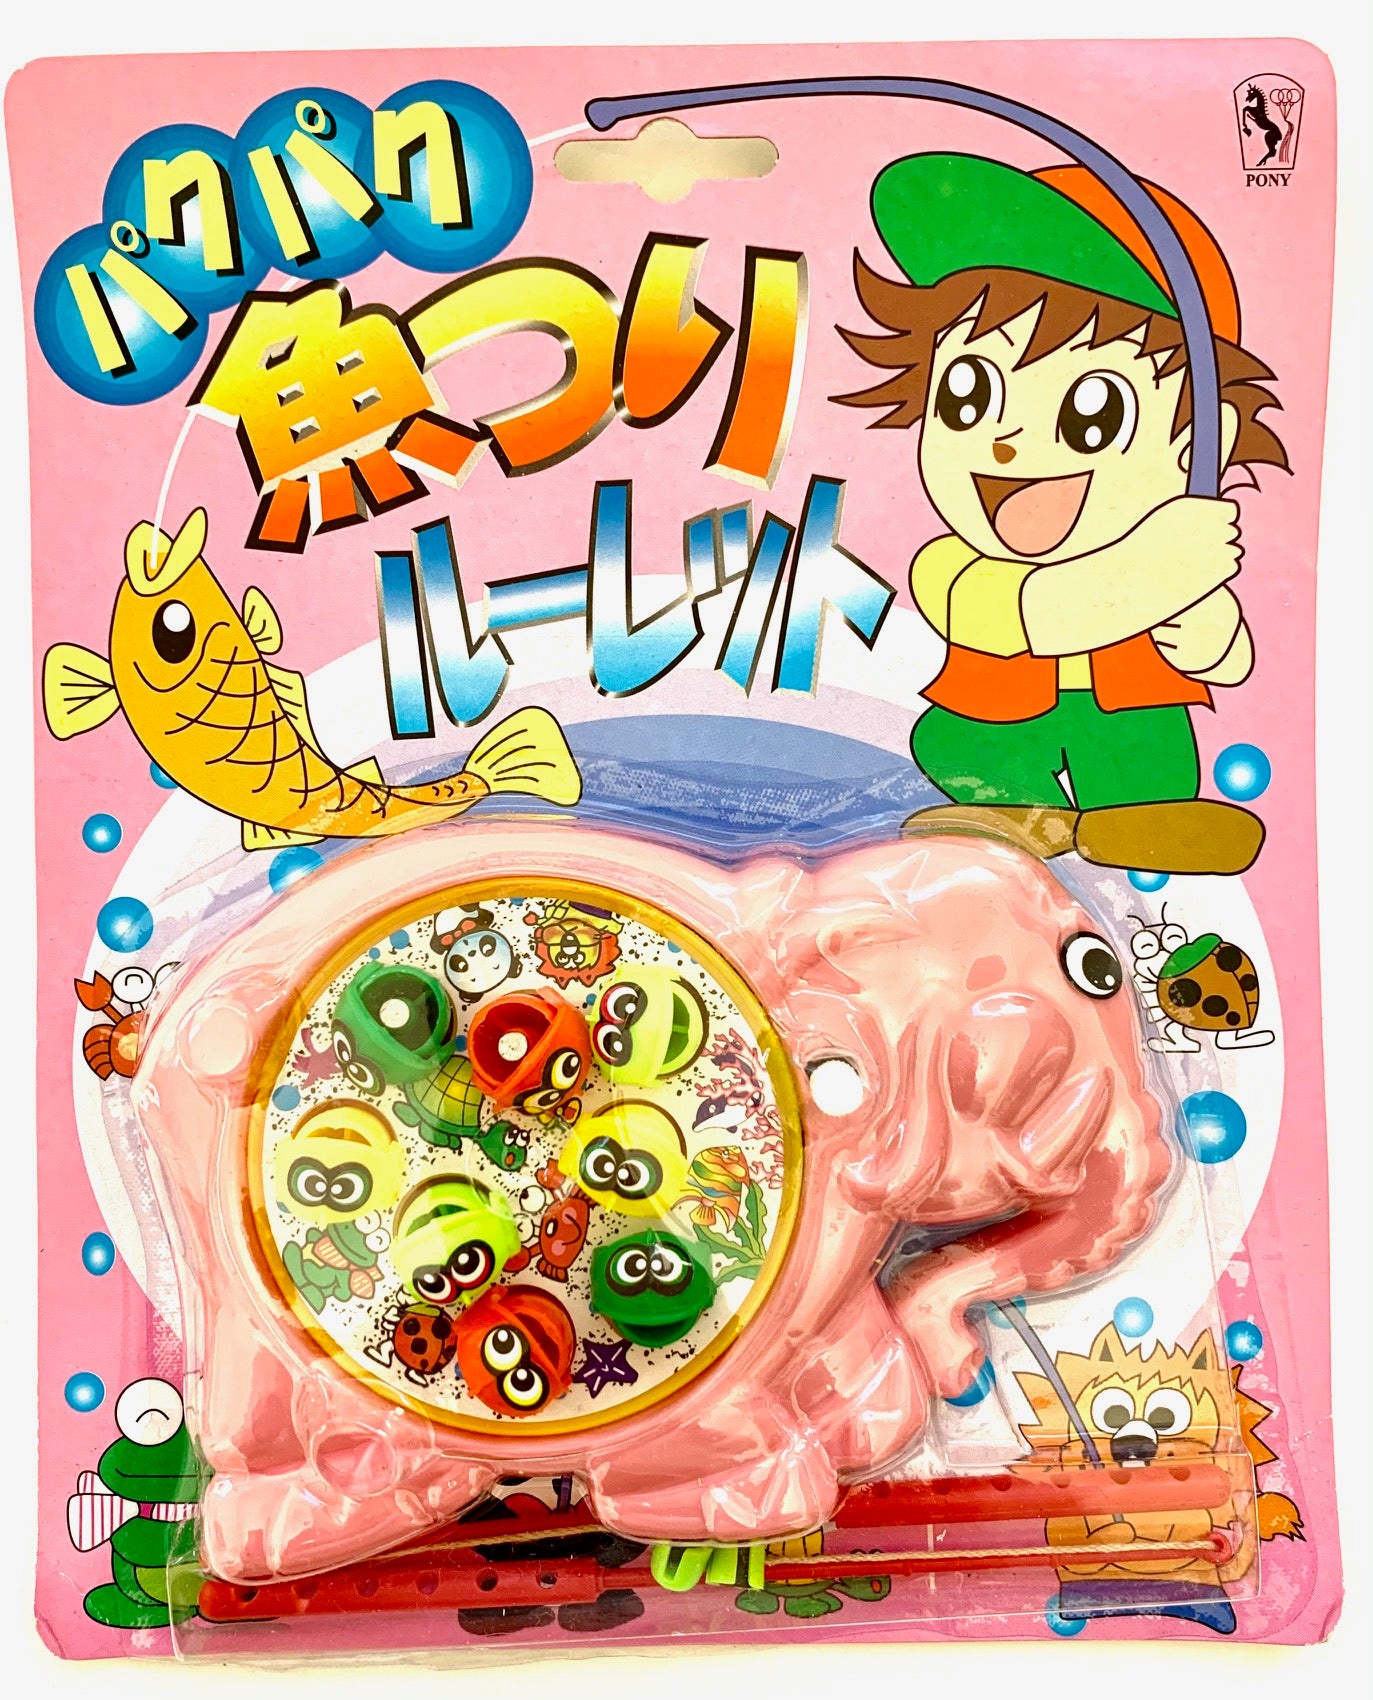 X 07046 Japanese Fishing Game-DISCONTINUED